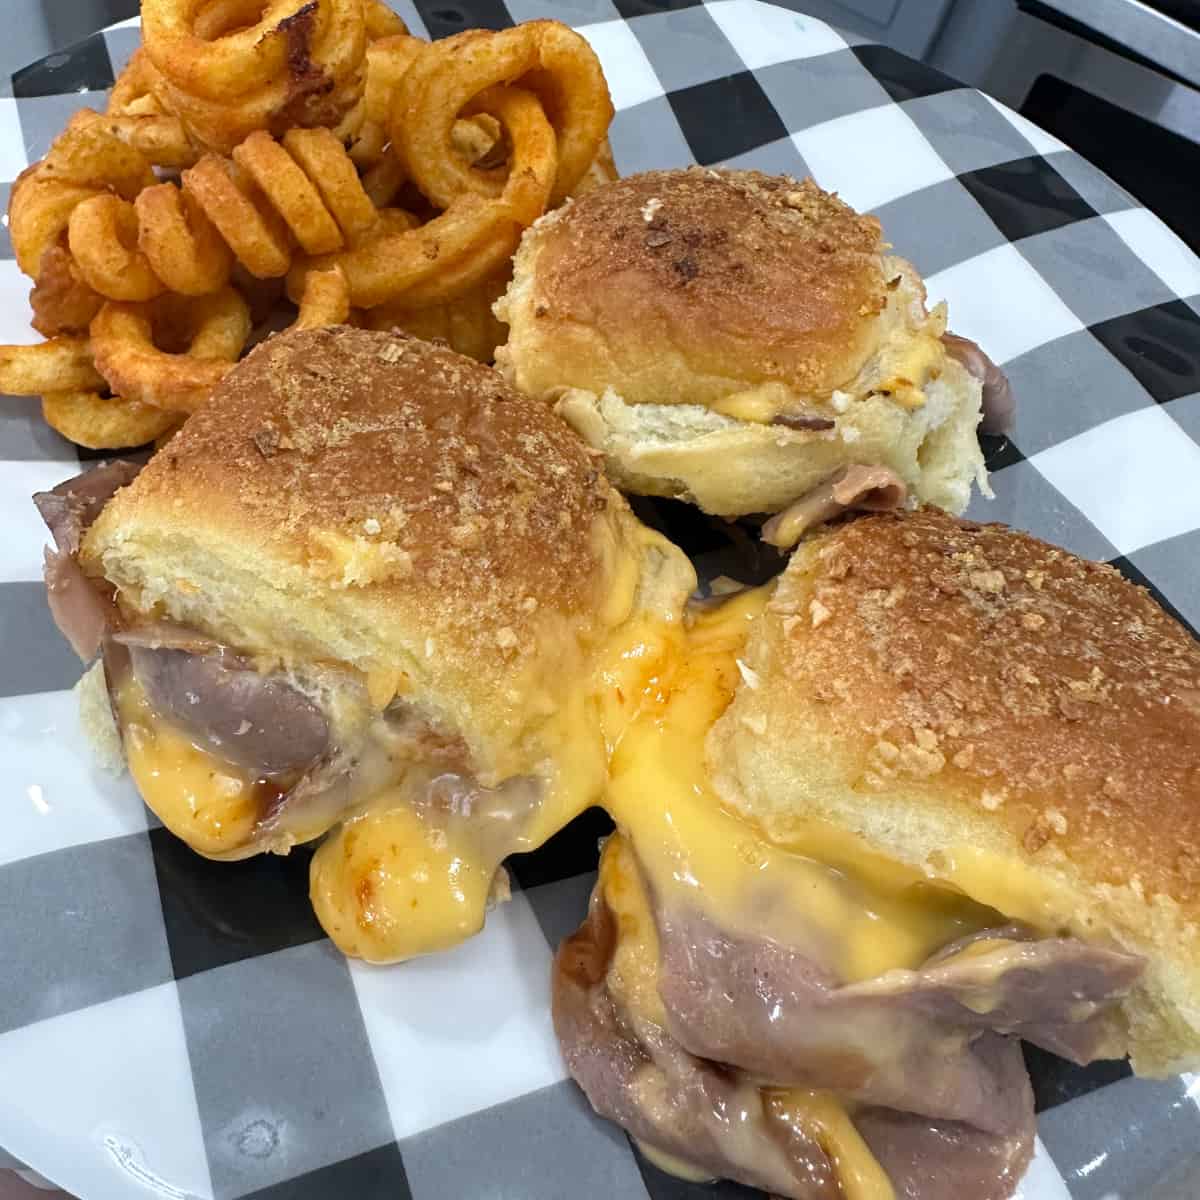 Beef and Cheddar Sliders